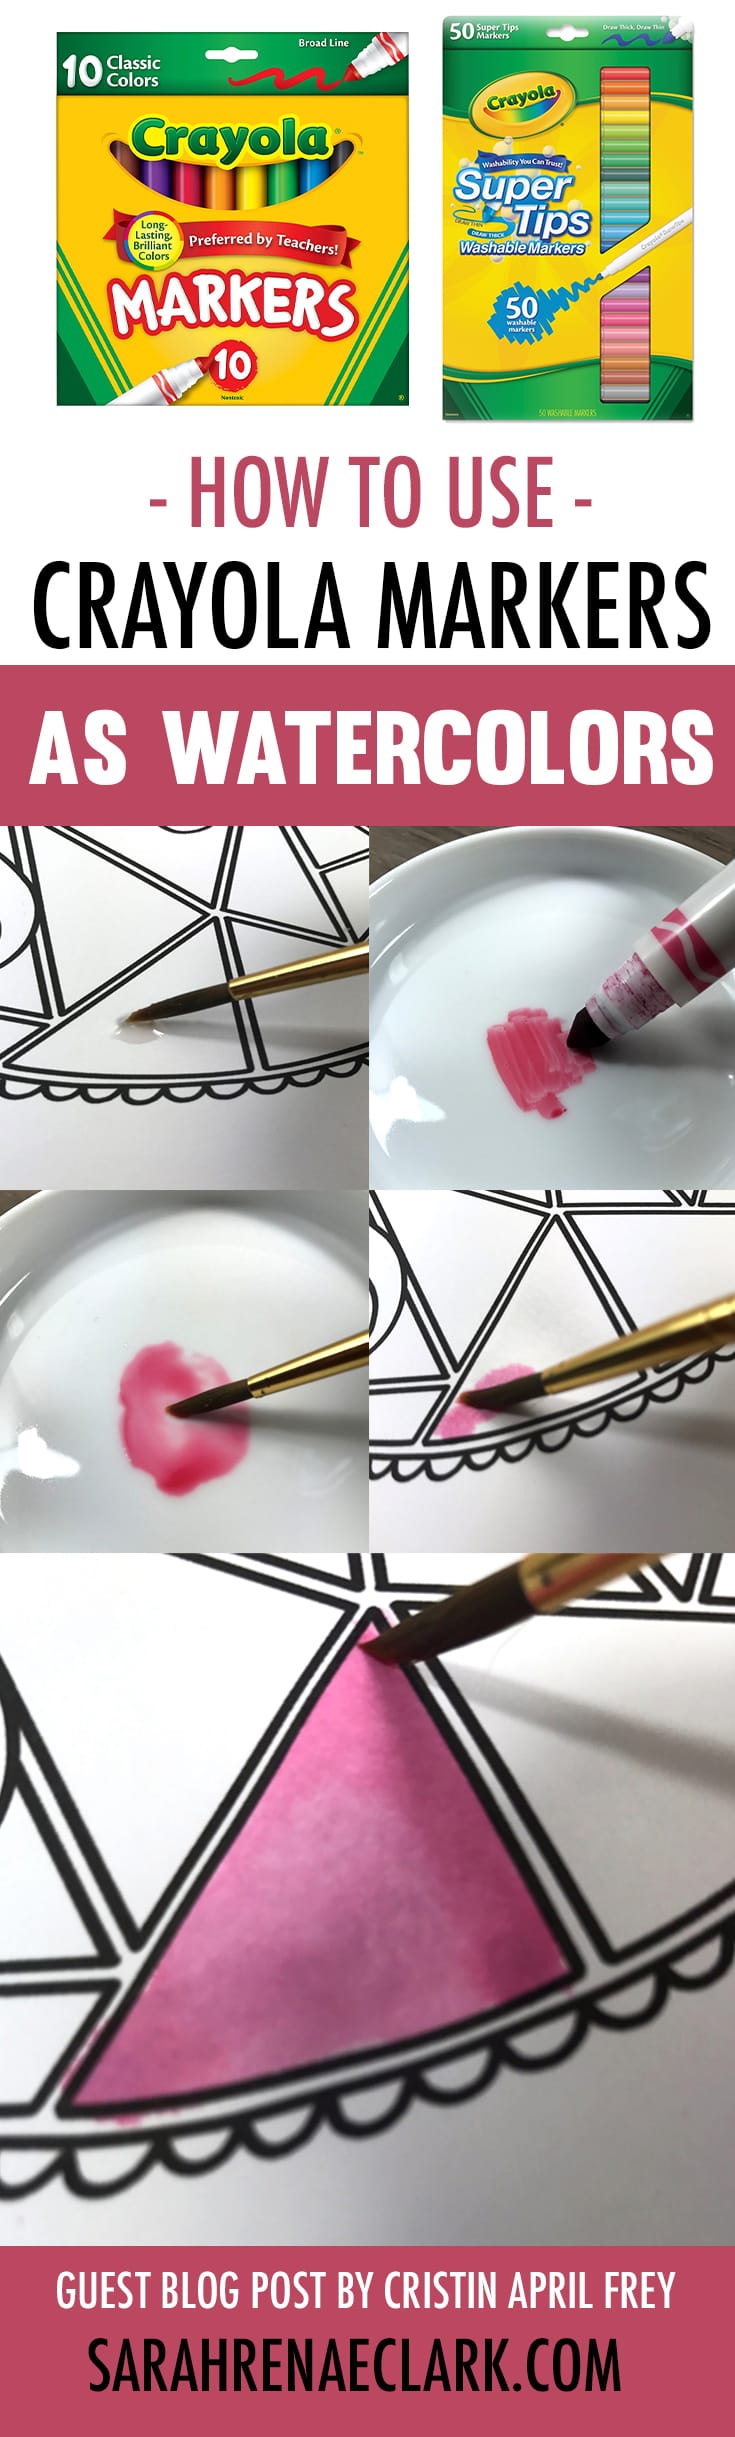 What a clever Crayola hack! Use your Crayola markers as watercolor paints. Check out the step-by-step photos and video tutorial, plus other adult coloring hacks at www.sarahrenaeclark.com | How to use Crayola markers as watercolors